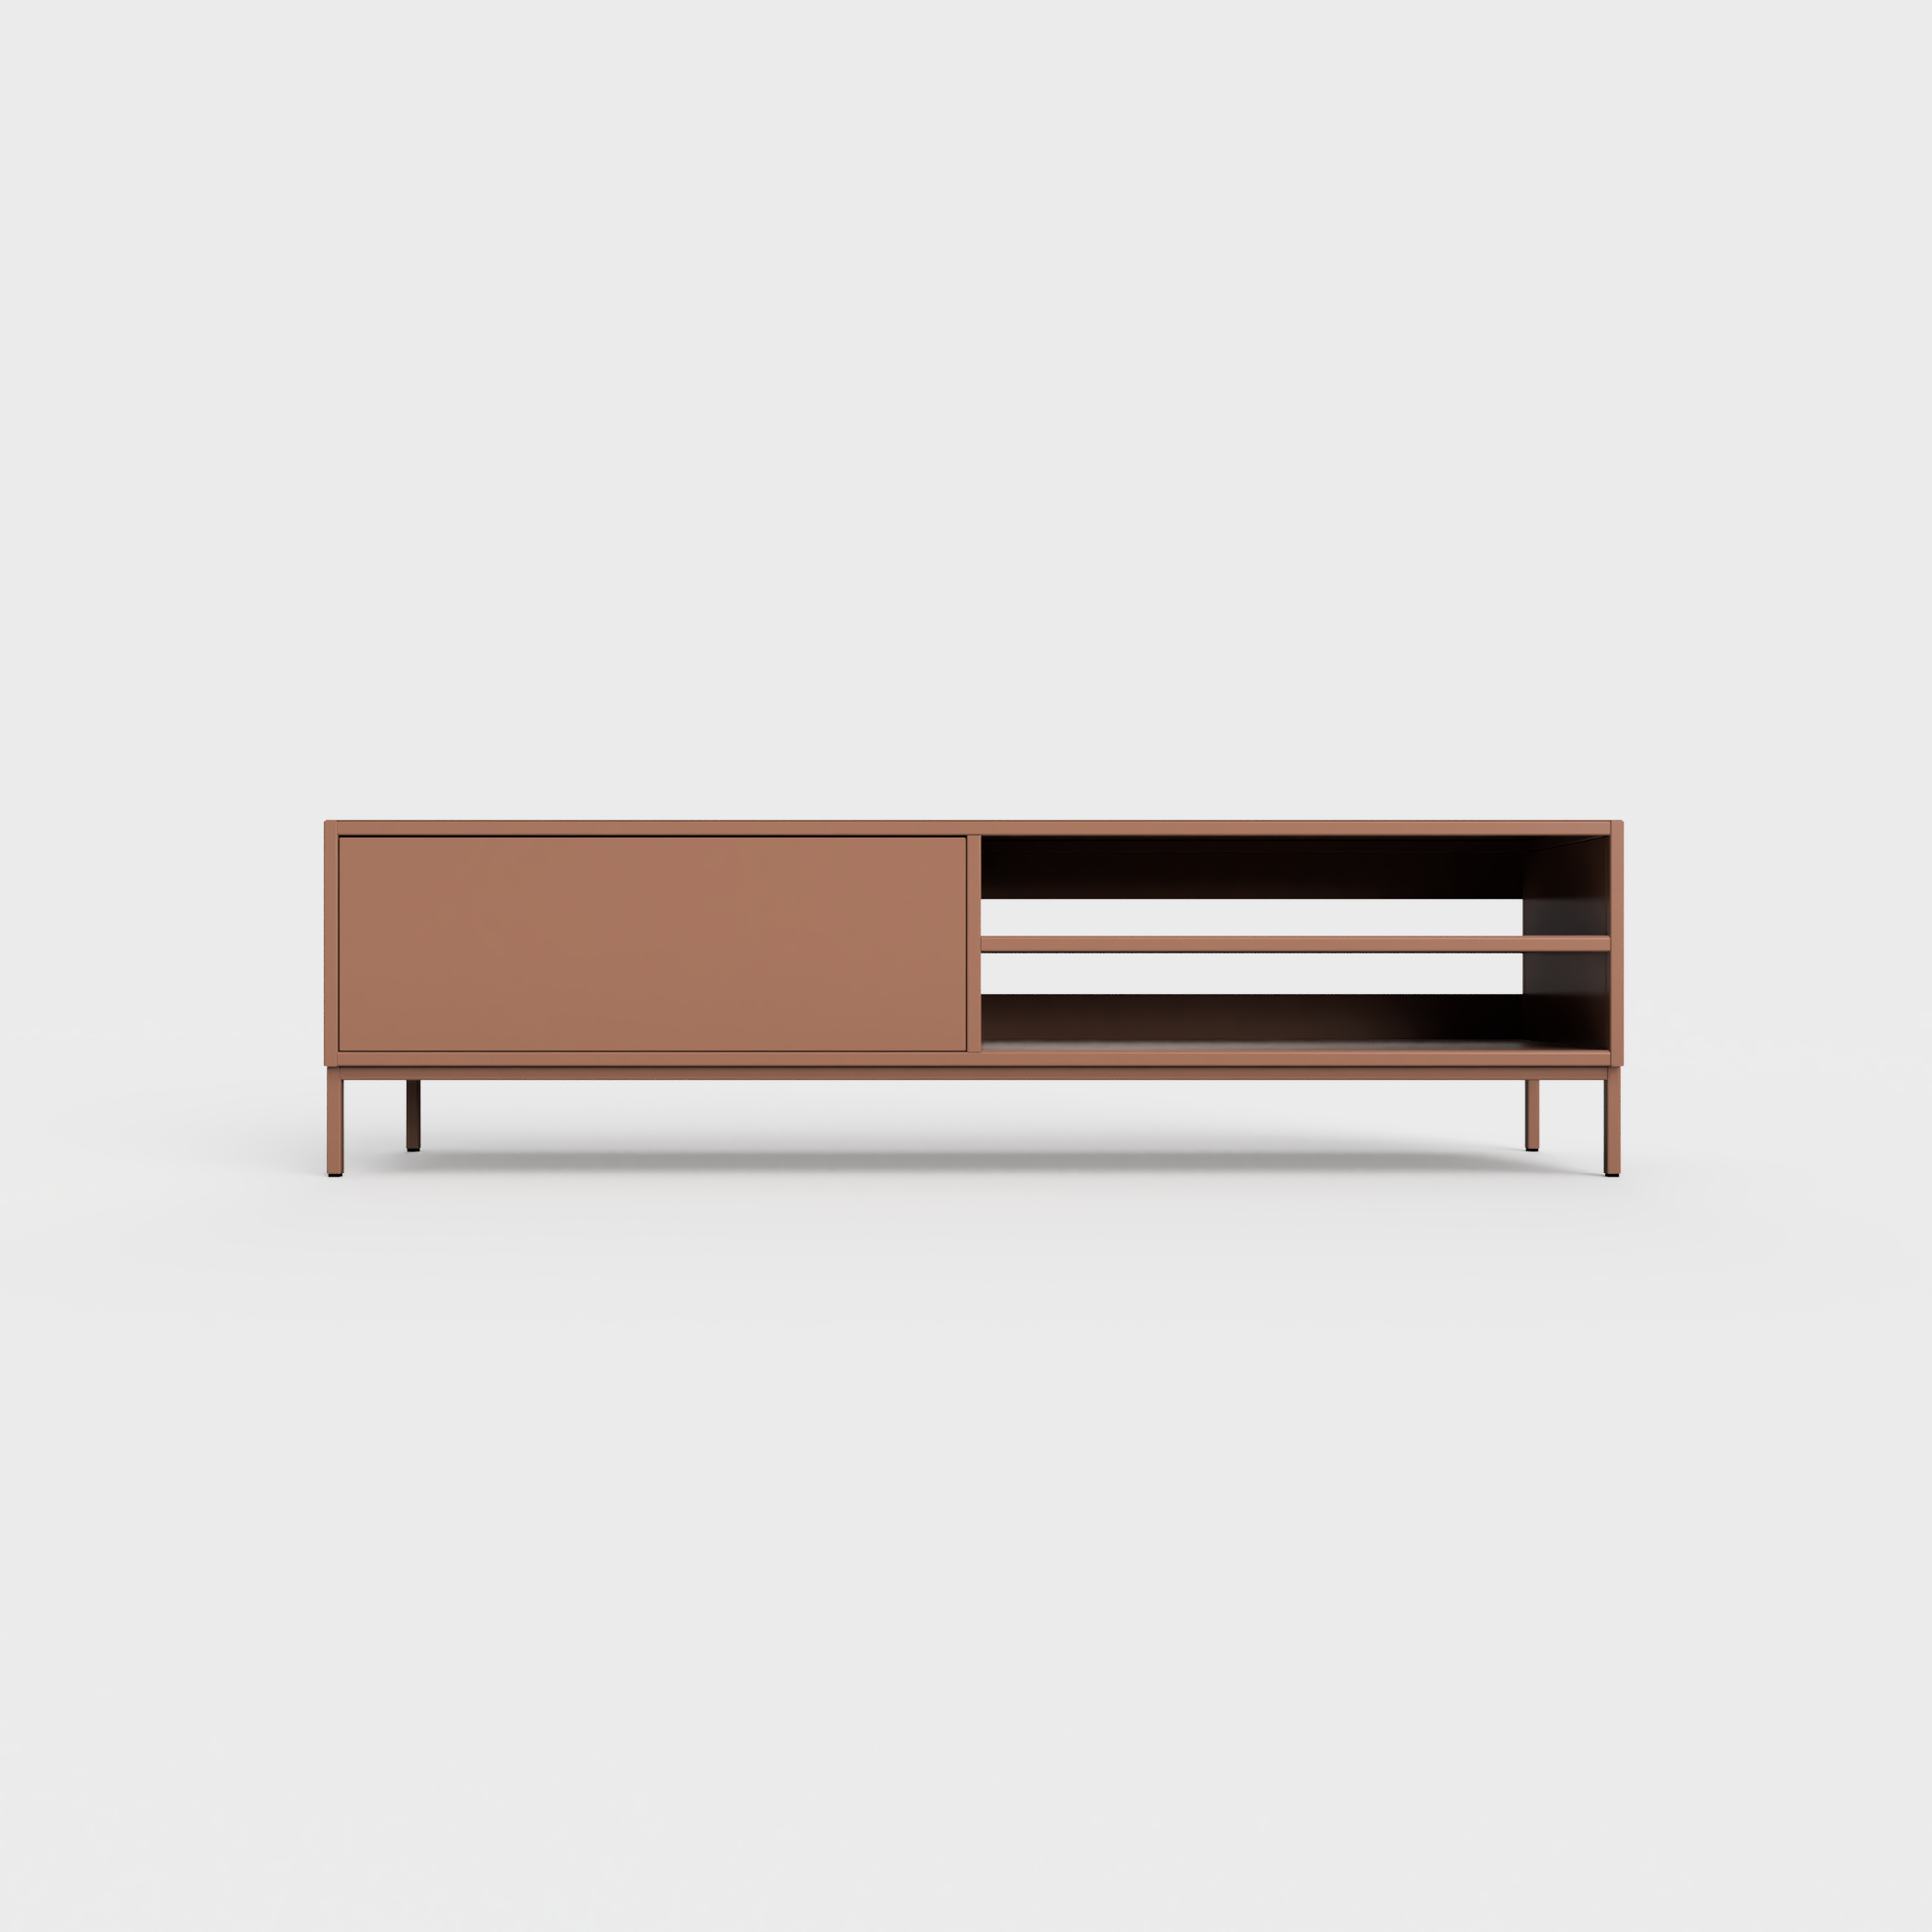 Prunus 02 Lowboard in Terracotta color, powder-coated steel, elegant and modern piece of furniture for your living room